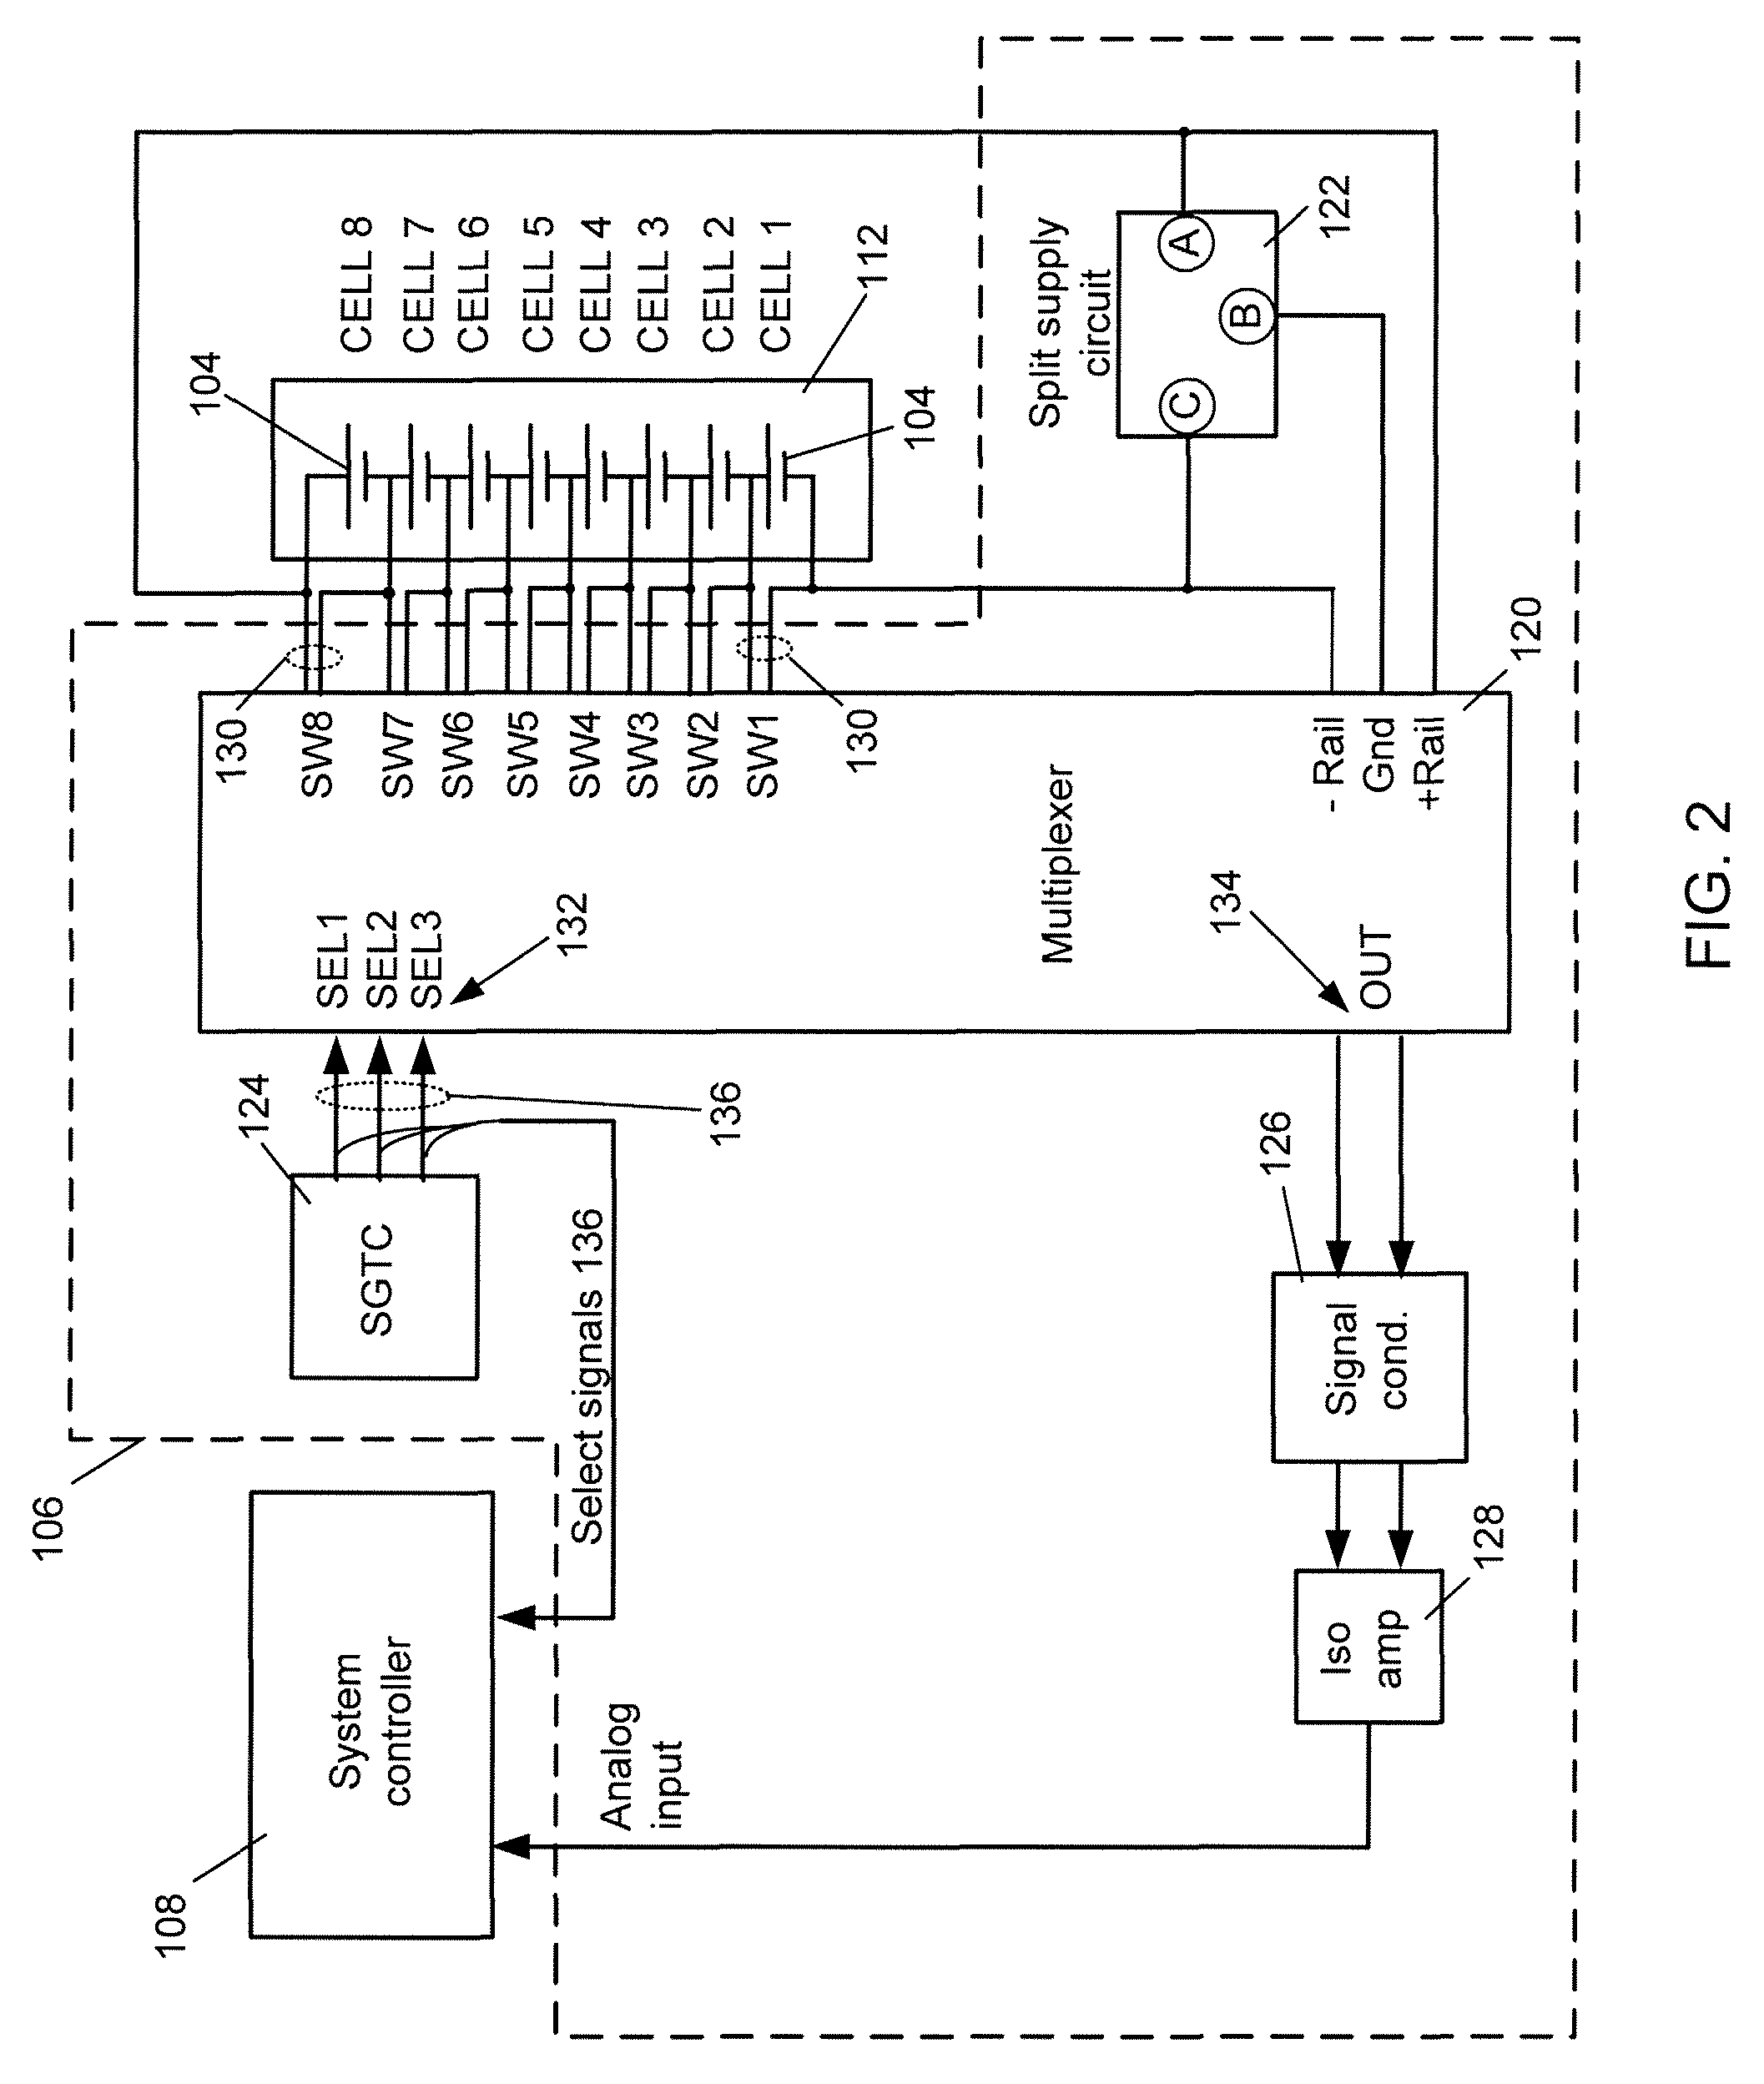 Method and system for monitoring and balancing cells in battery packs utilizing optically coupled cell voltage selection signal, cell voltage isolation amplifier, and zener diodes in balancing circuit